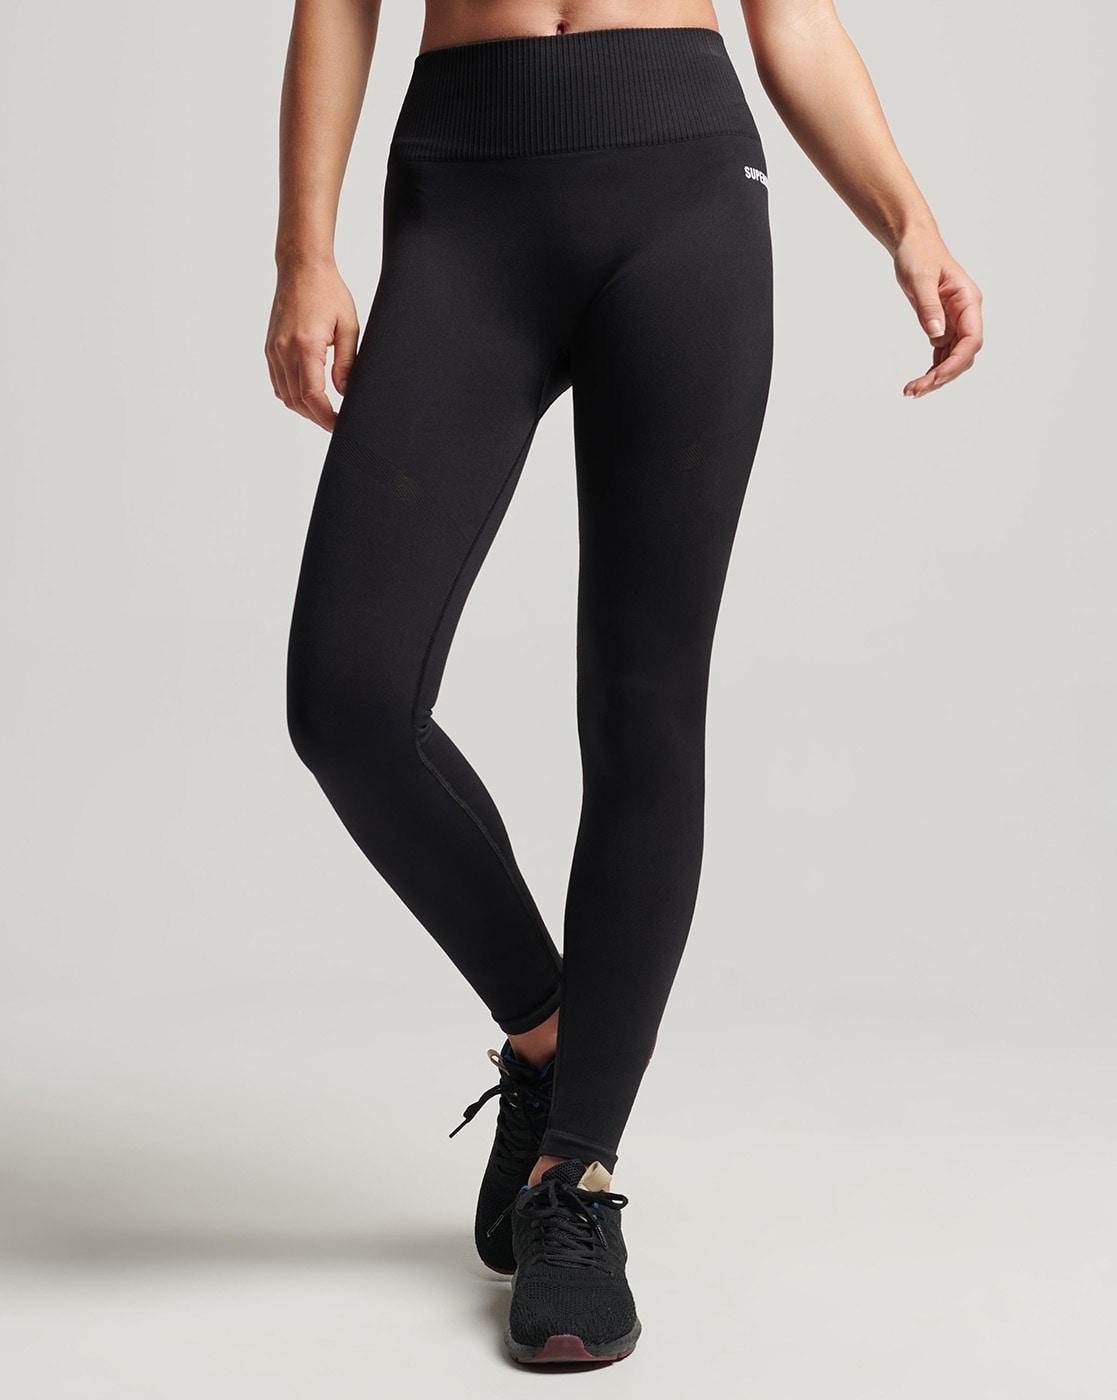 Buy Spyder Active Women's Performance High Rise Legging Tight, Black, Small  at Amazon.in